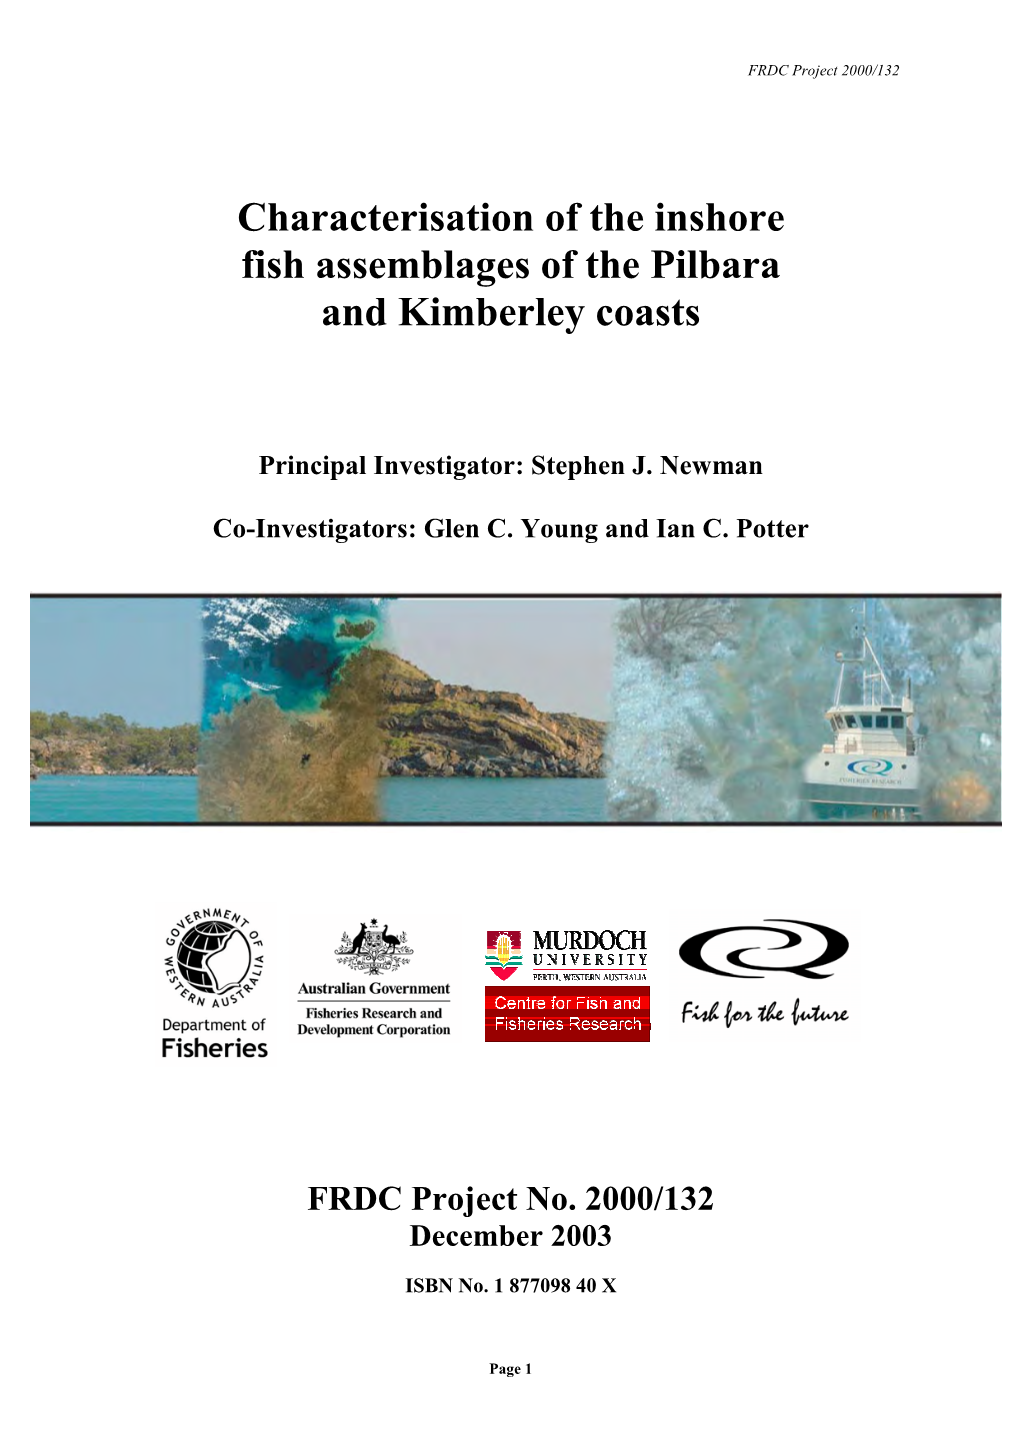 Characterisation of the Inshore Fish Assemblages of the Pilbara and Kimberley Coasts